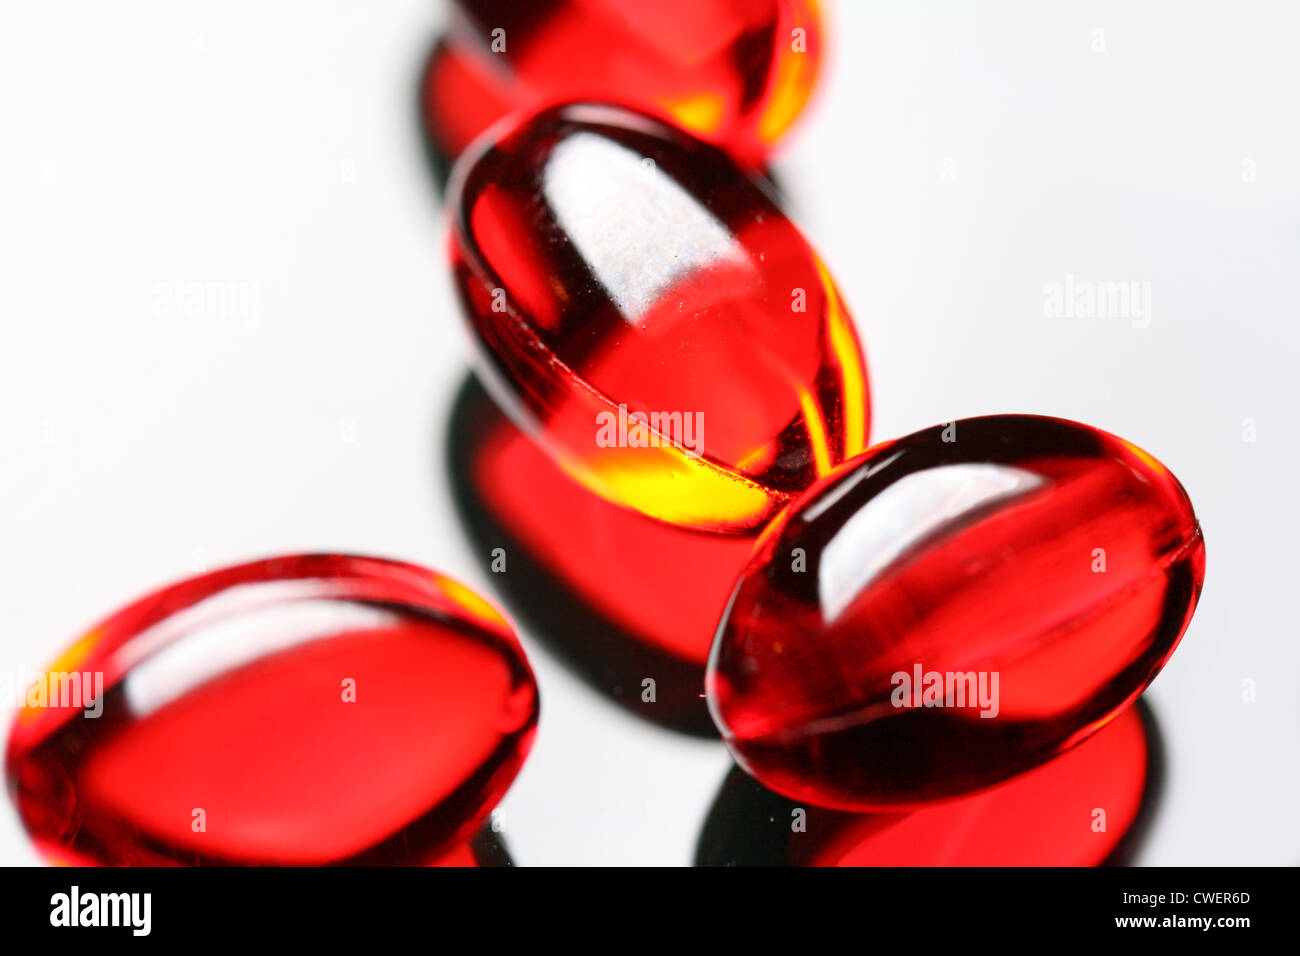 close-up of gel vitamin E supplement capsules on mirror background Stock Photo